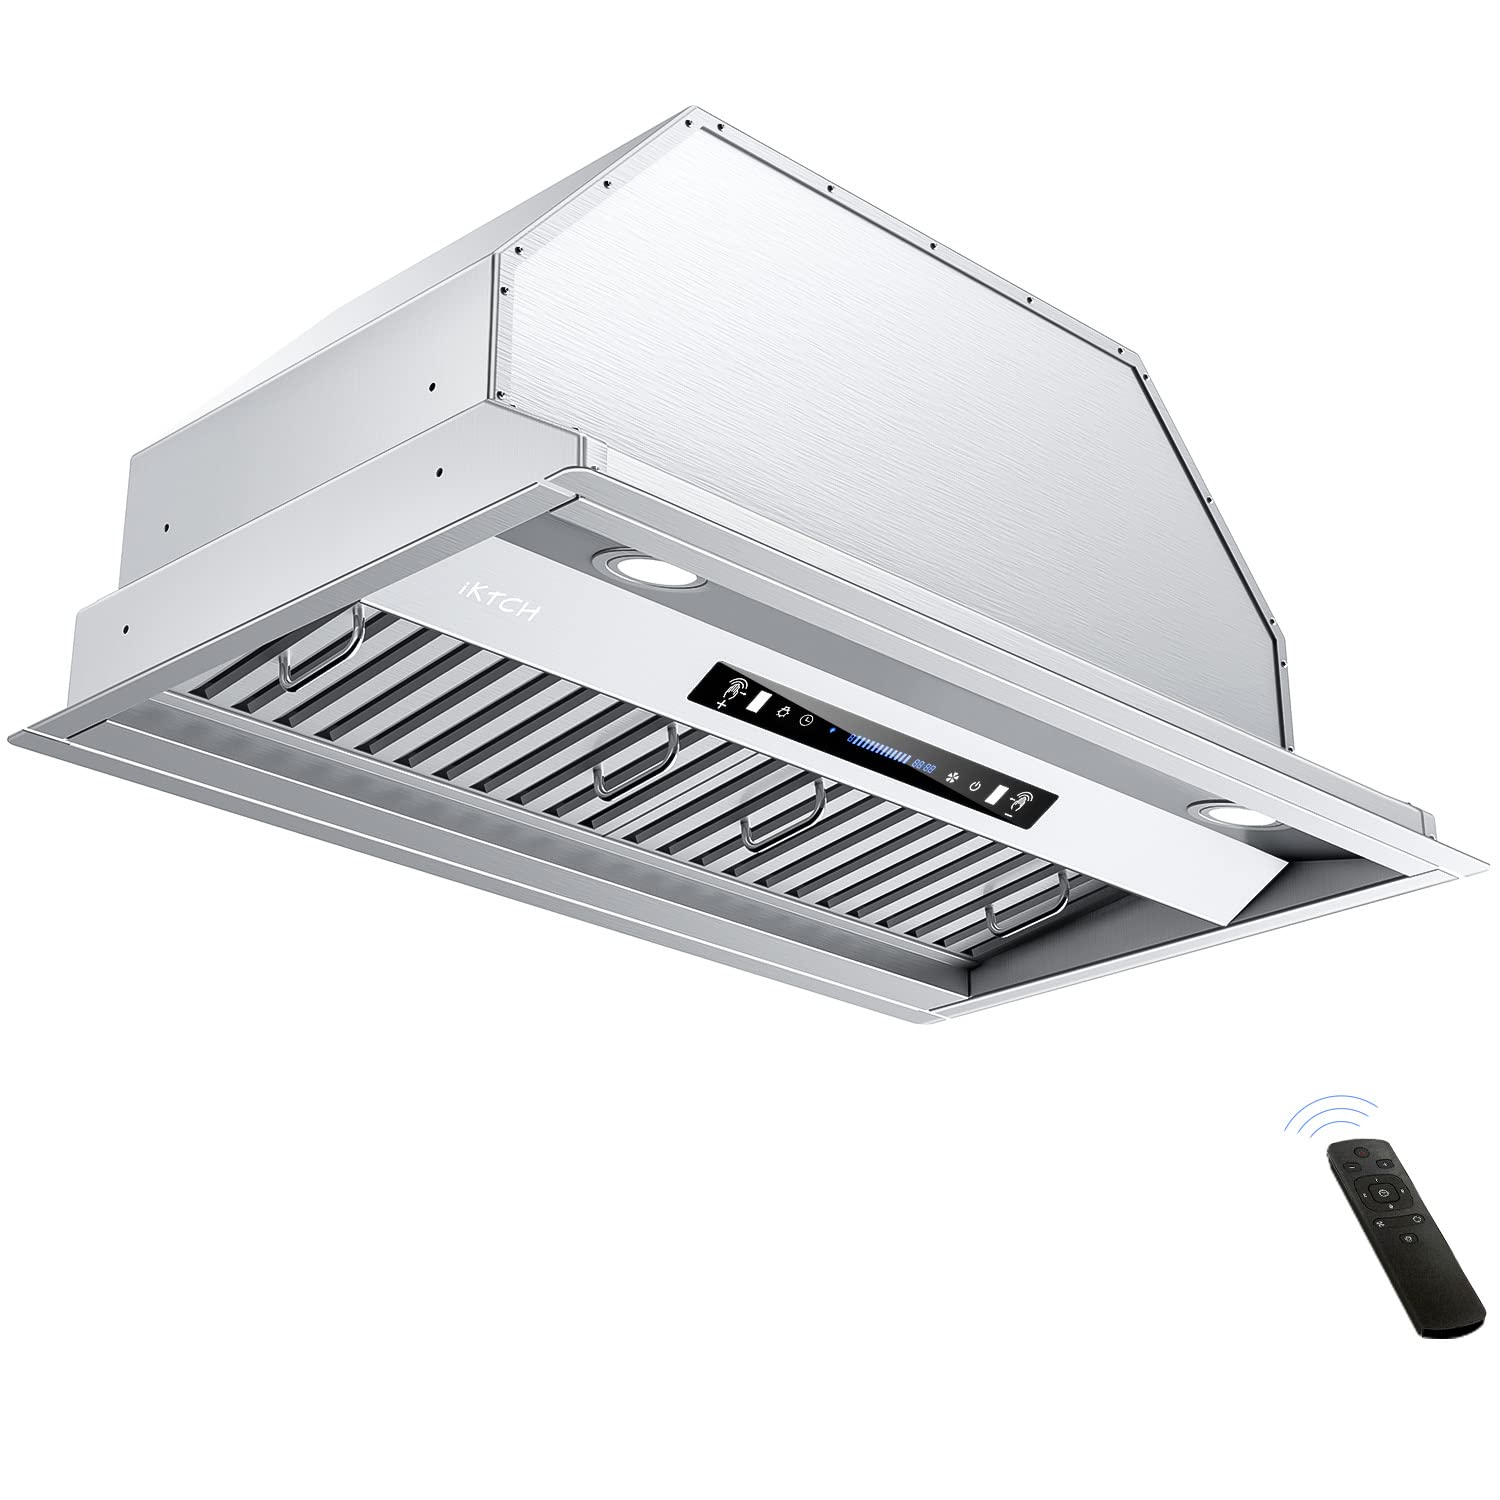 IKTcH 30 inch Built-inInsert Range Hood 900 cFM, DuctedDuctless convertible Duct, Stainless Steel Kitchen Vent Hood with 2 Pcs A